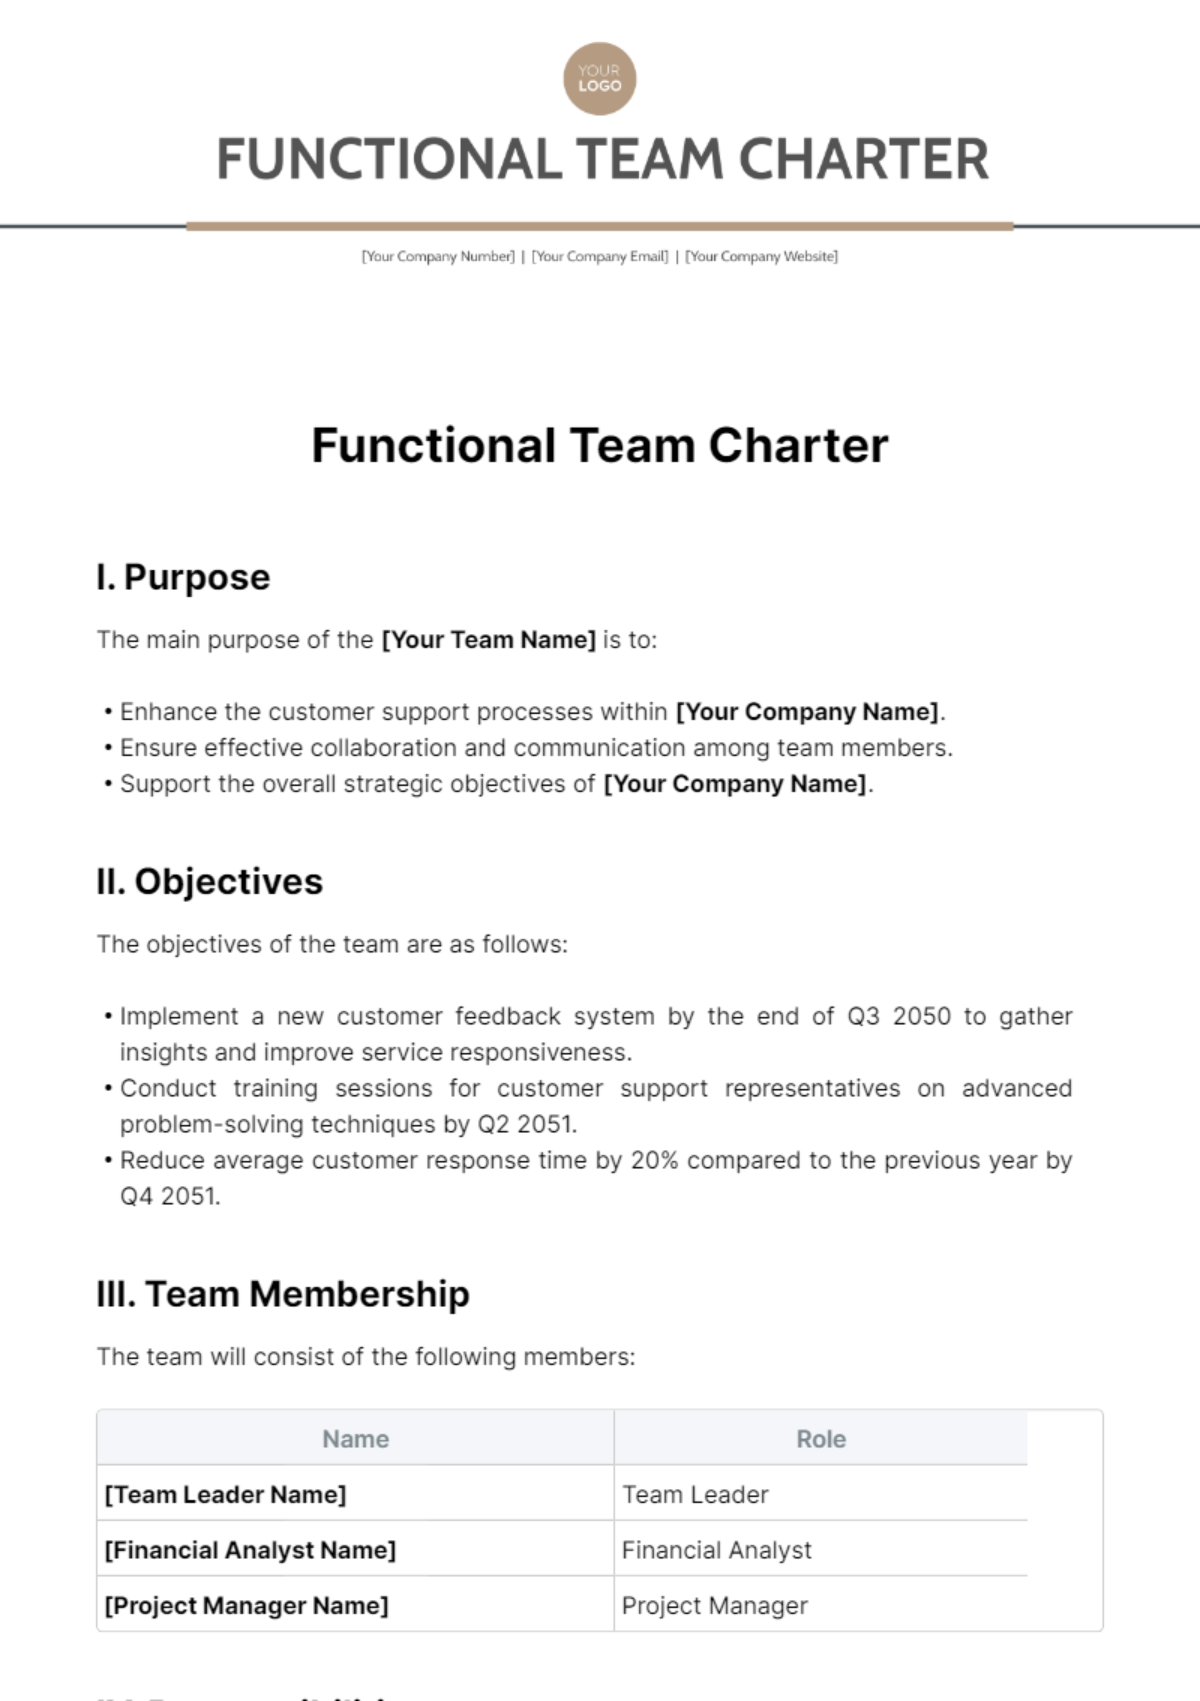 Functional Team Charter Template